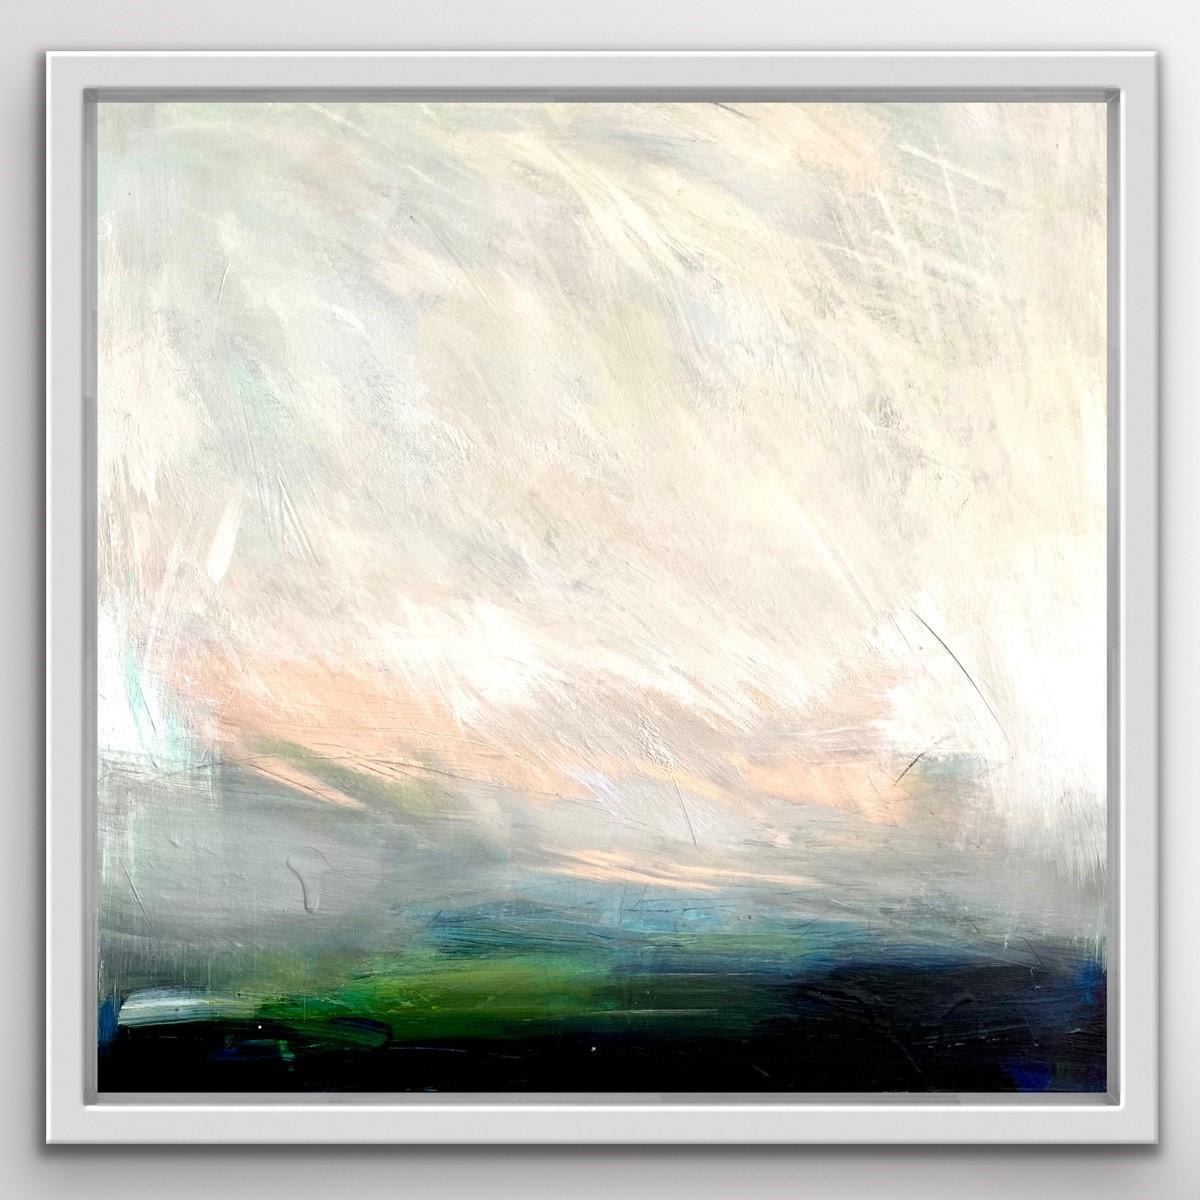 Big Sky [2021]

original
Acrylic on canvas
Image size: H:50 cm x W:50 cm
Complete Size of Unframed Work: H:50 cm x W:50 cm x D:1.5cm
Sold Unframed
Please note that insitu images are purely an indication of how a piece may look

My Big Sky series is